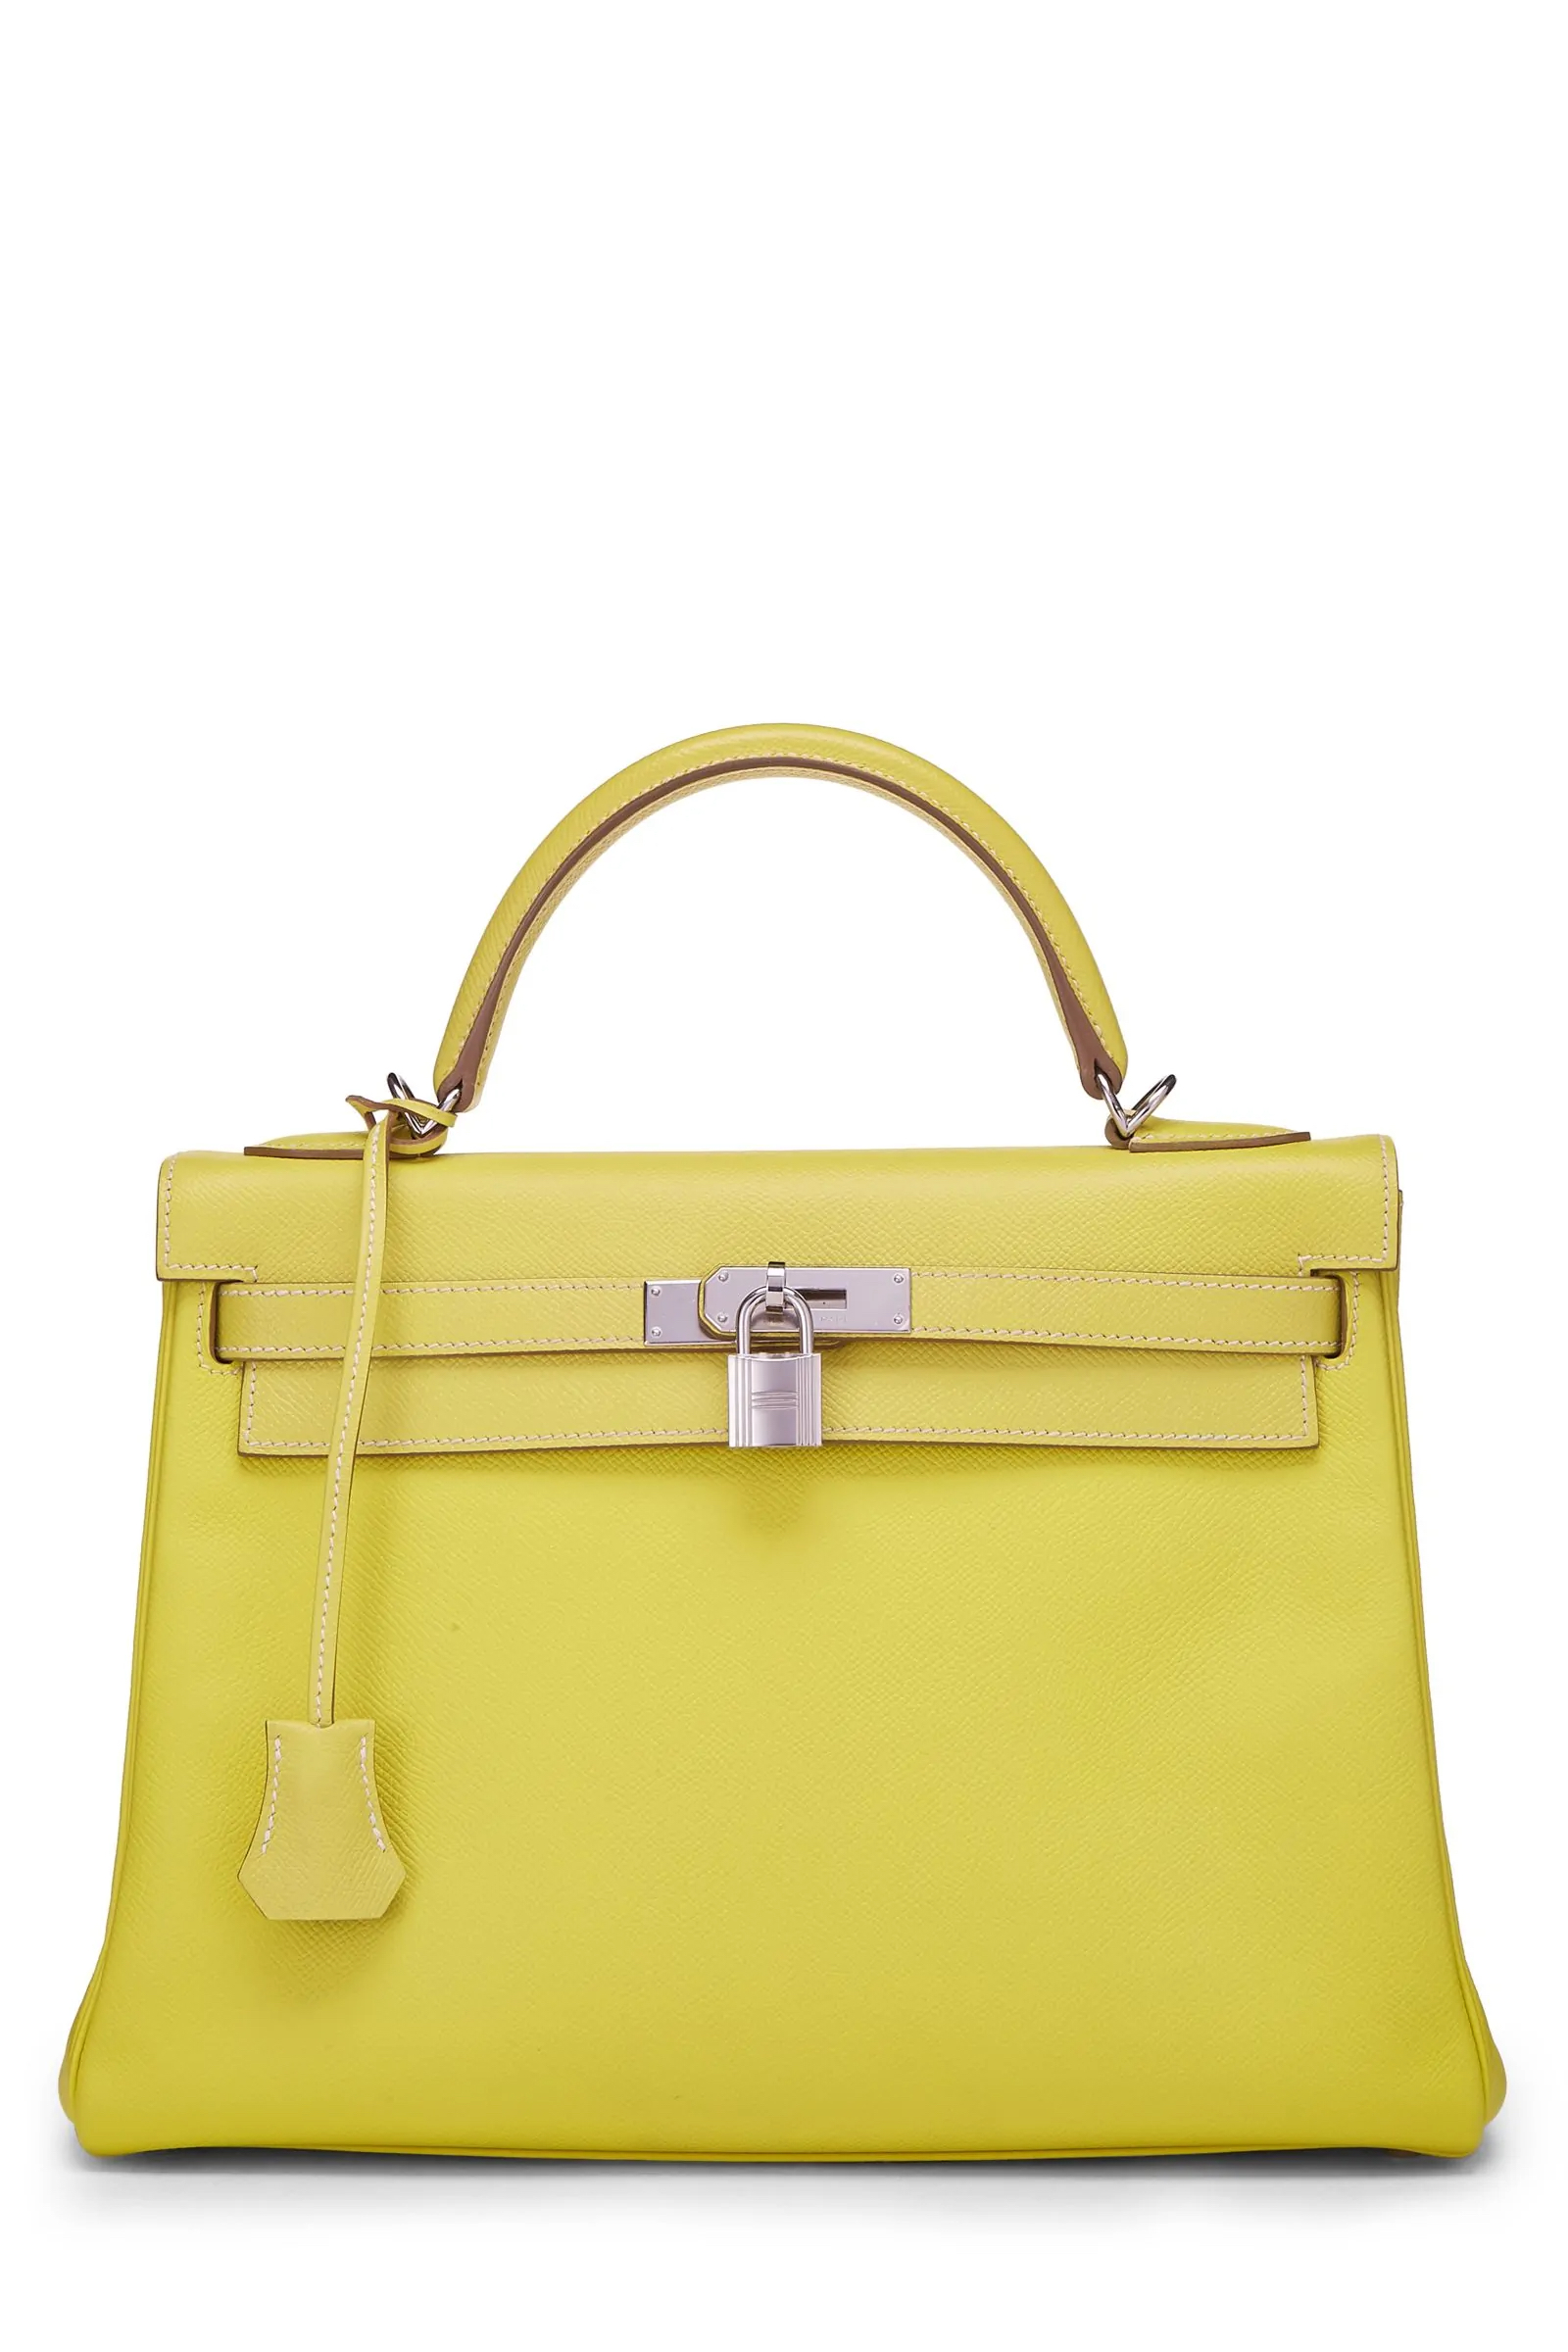 Hermes Birkin 30 Bag Rare Lime Candy Limited Edition Gris Perle